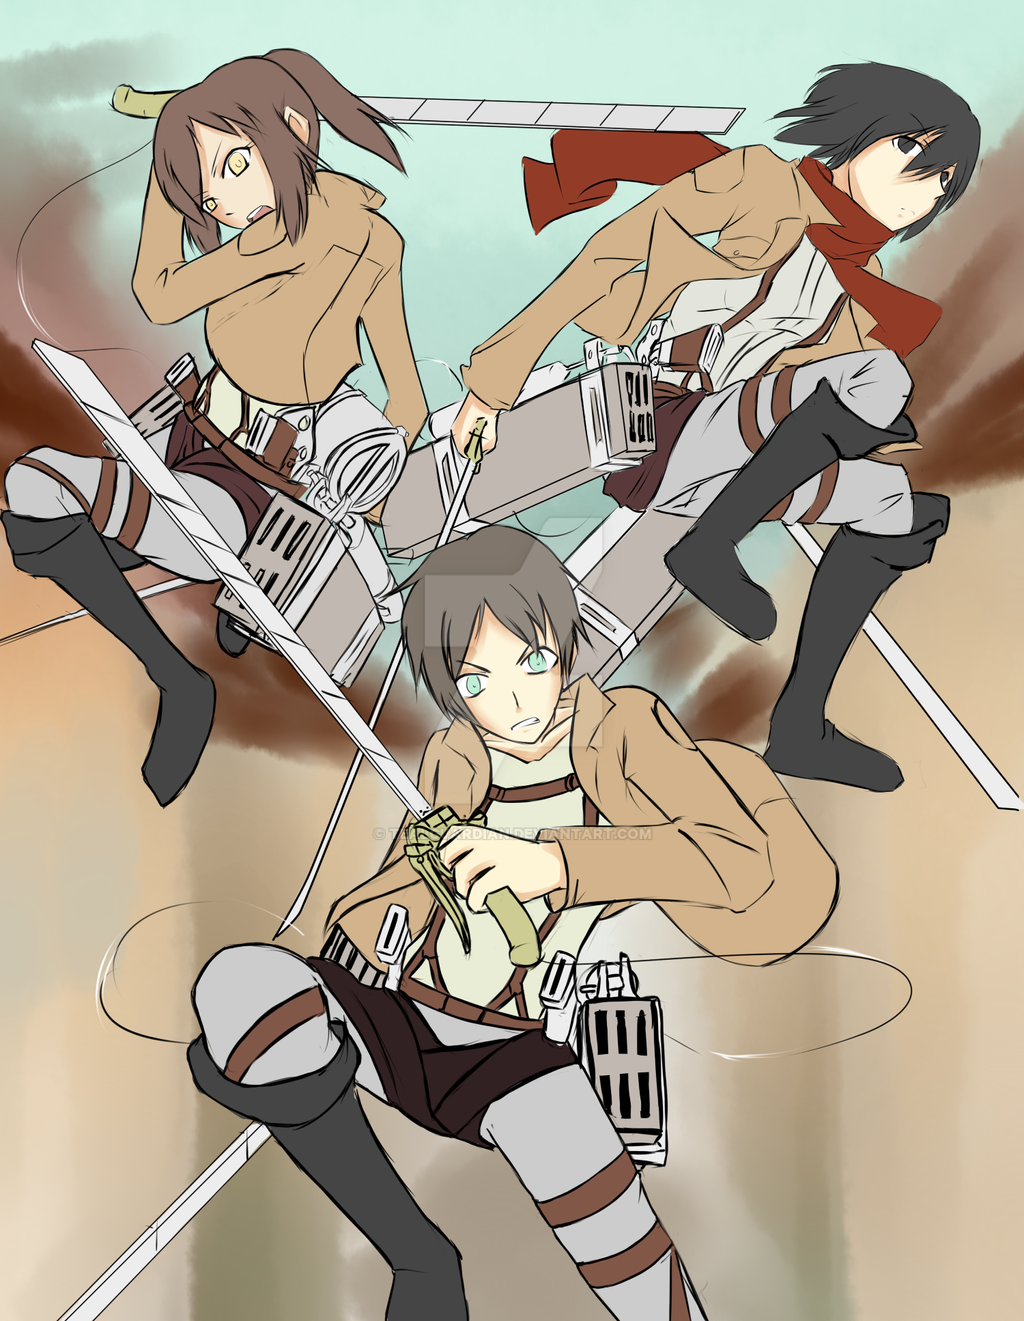 aot-unfinished-by-tealguardian-on-deviantart